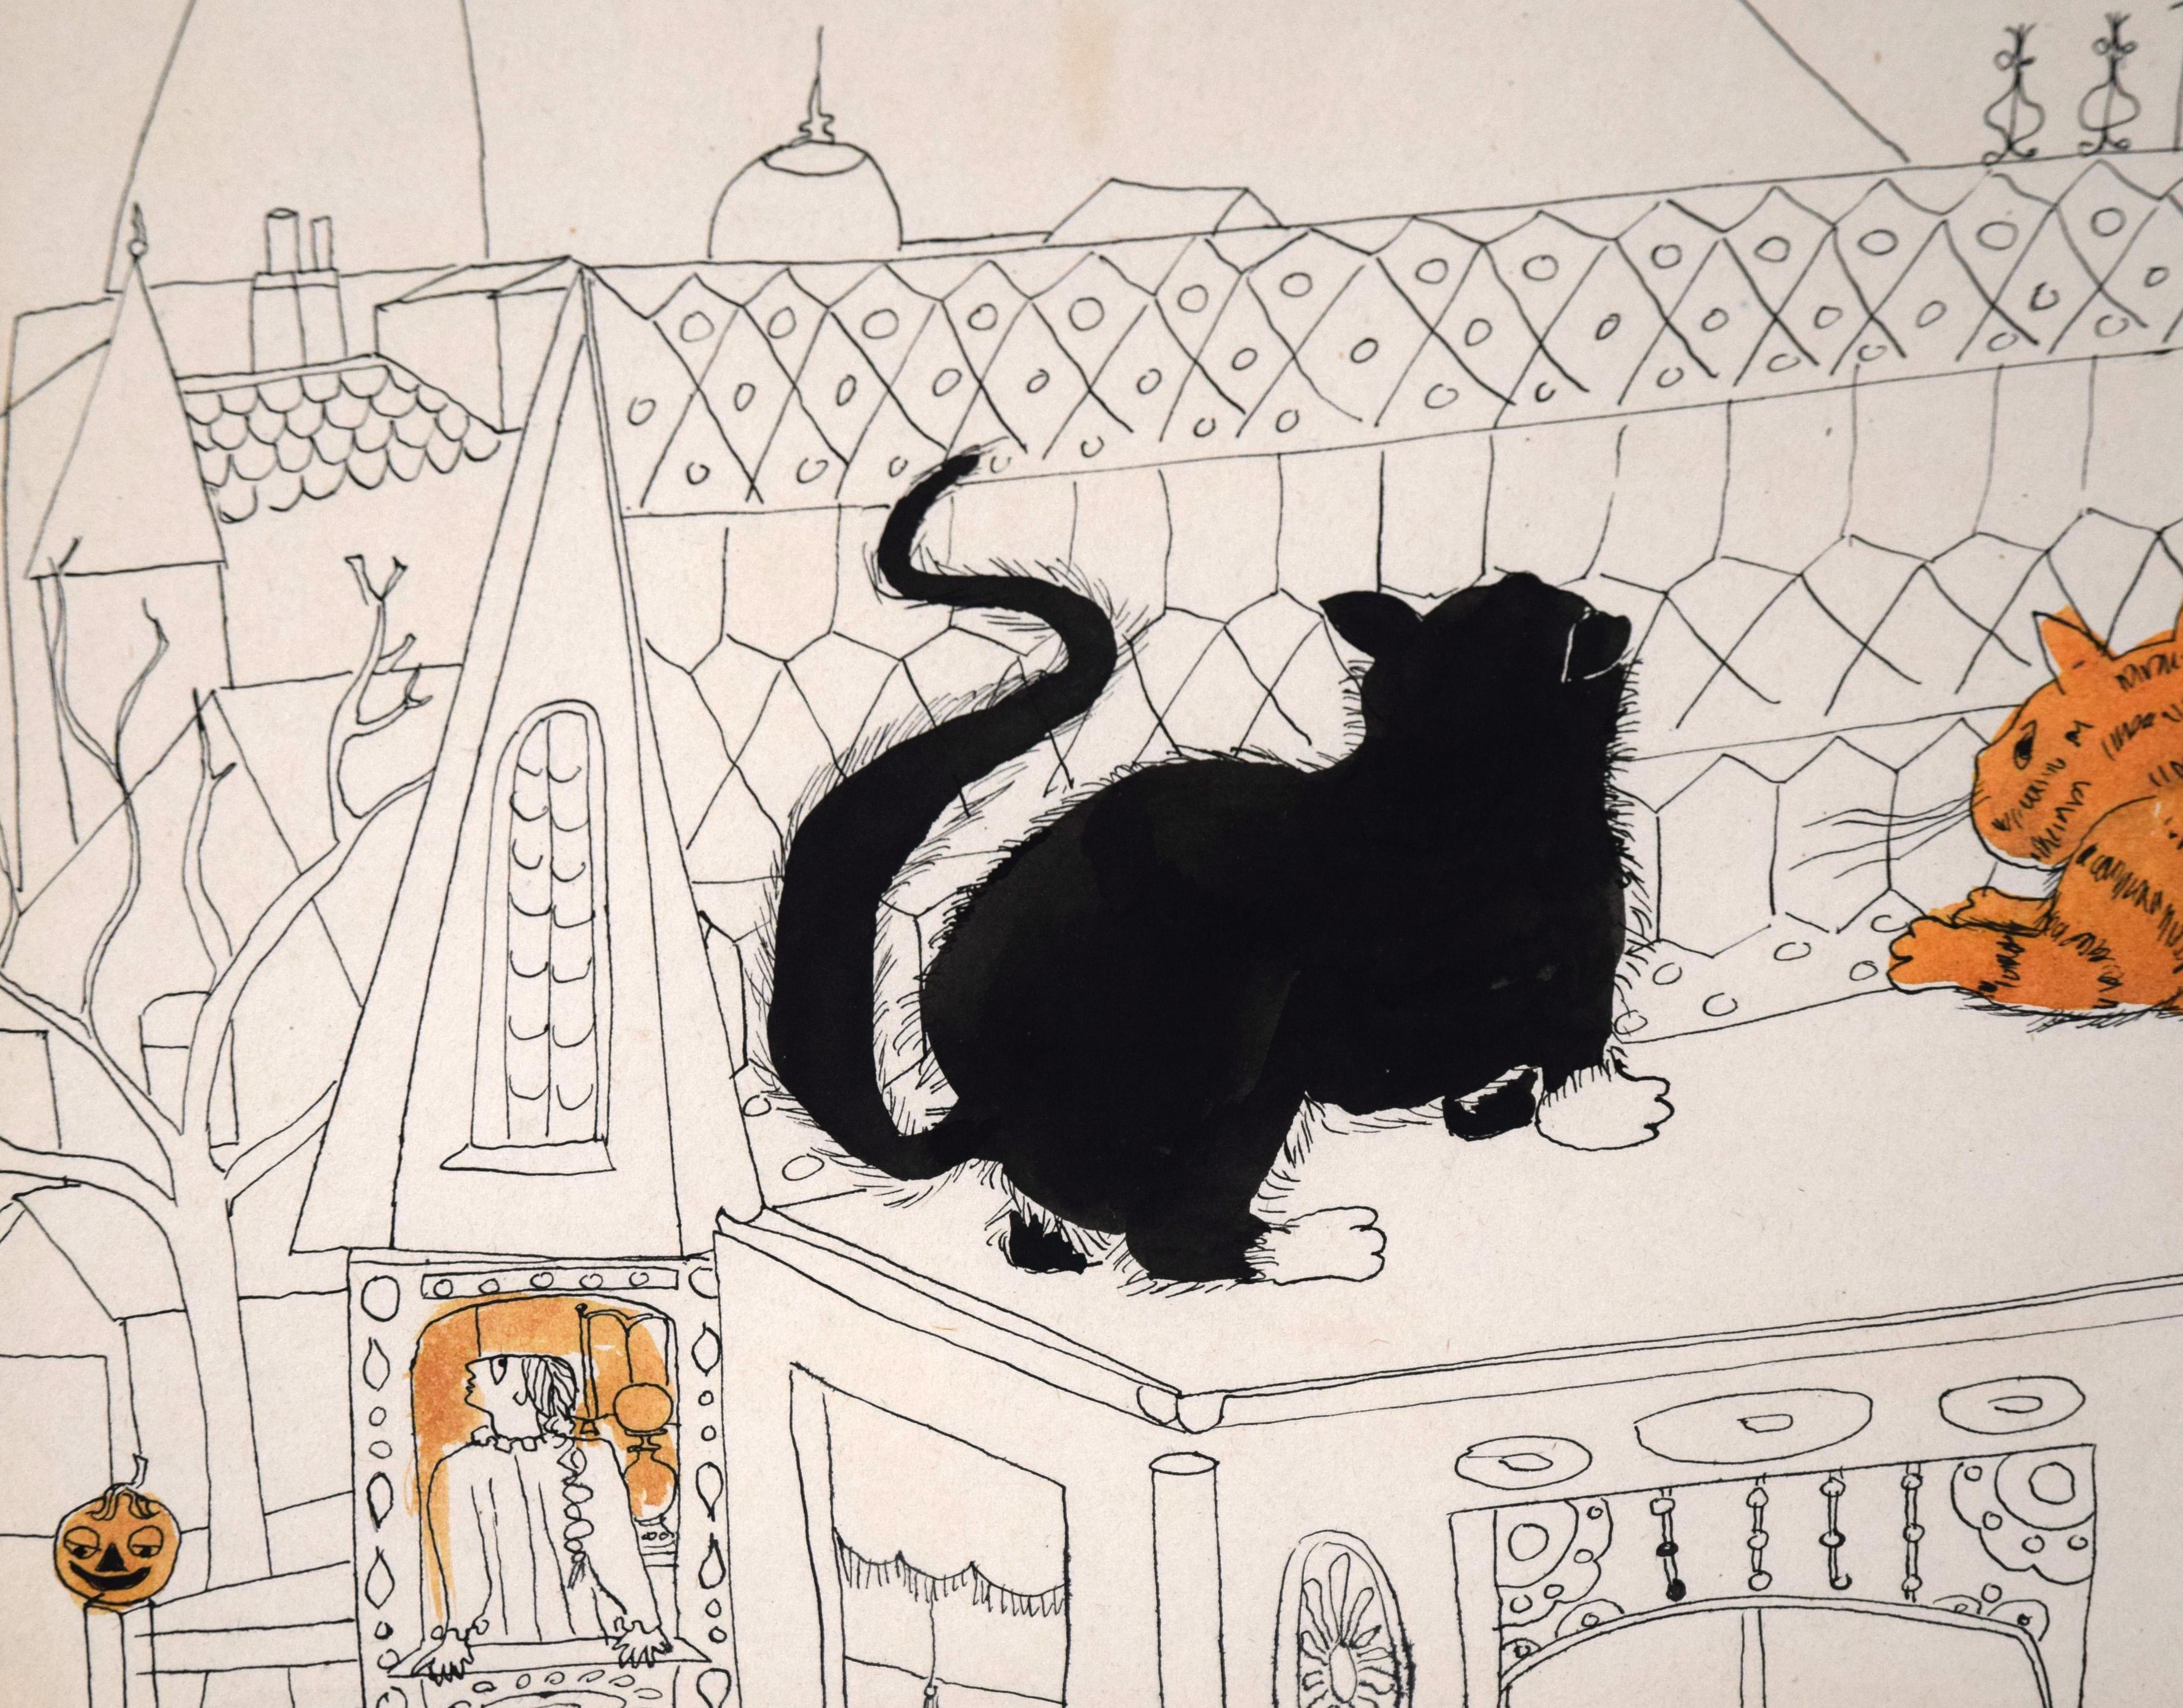 Cats Watching a Witch on a Broomstick - Vintage Halloween Illustration in Ink

Halloween scene with cats and a witch in India ink pen by Irene Pattinson (American, 1909-1999). A black cat and an orange tabby are watching a witch fly over rooftops on